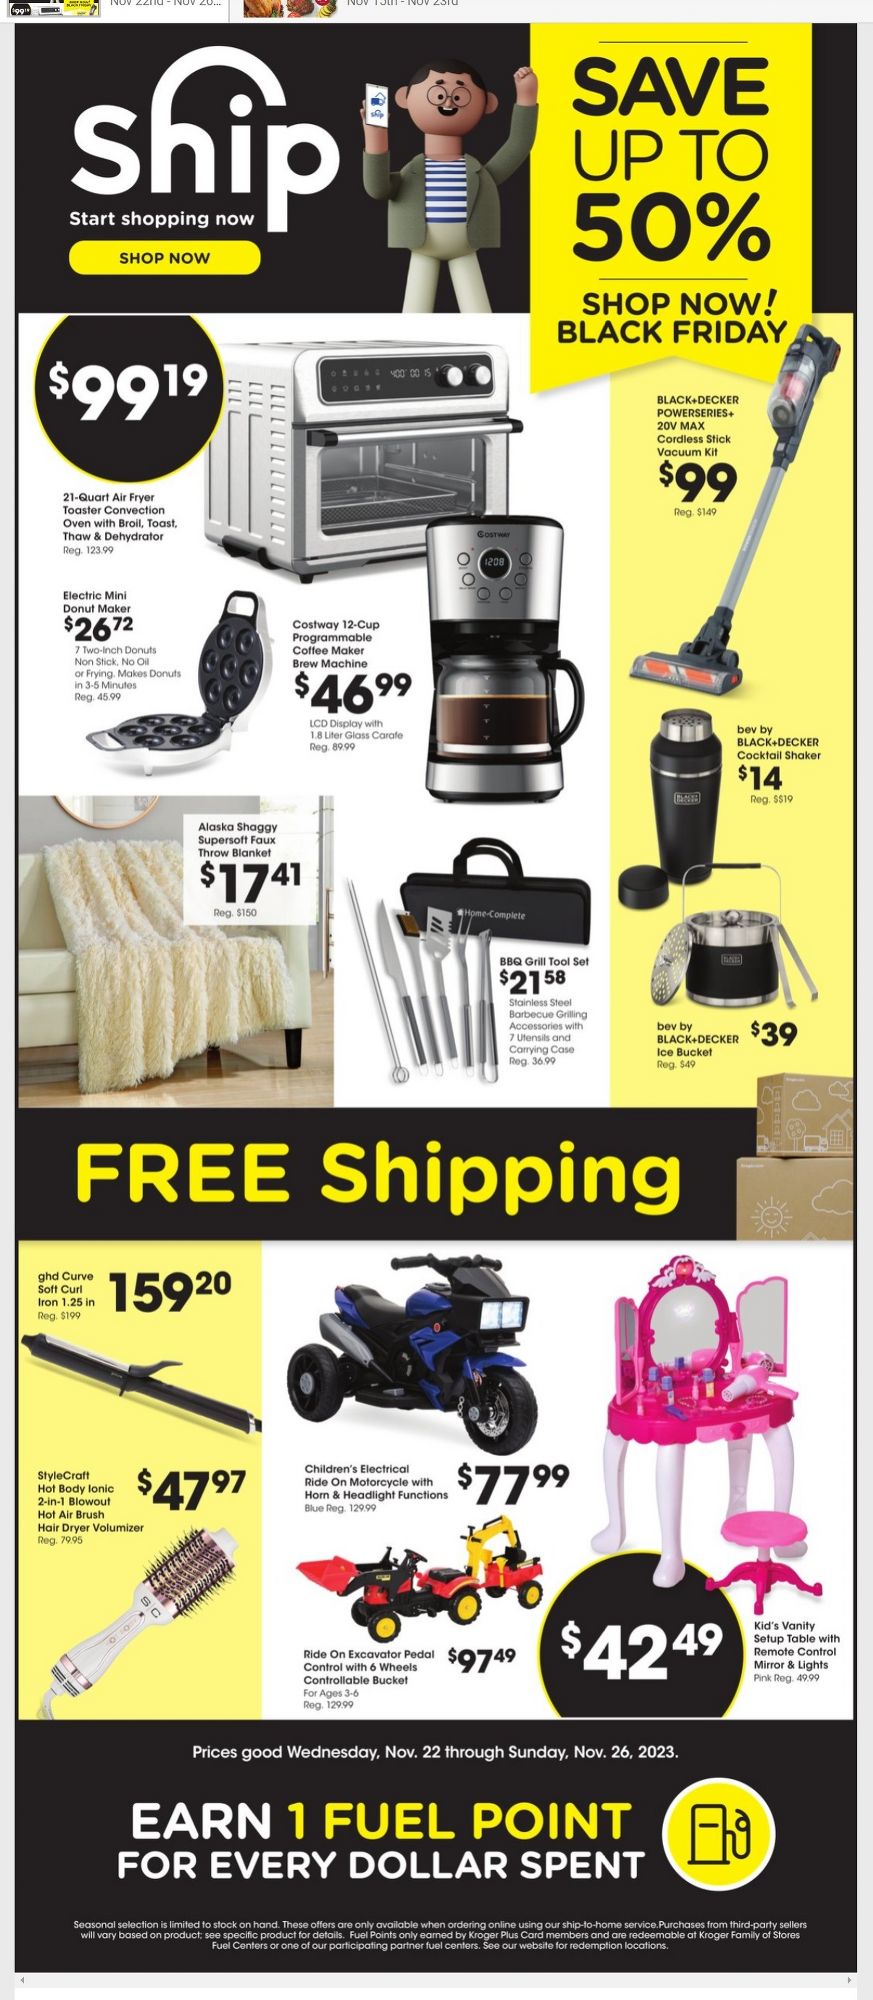 Pick n Save Black Friday July 2024 Weekly Sales, Deals, Discounts and Digital Coupons.